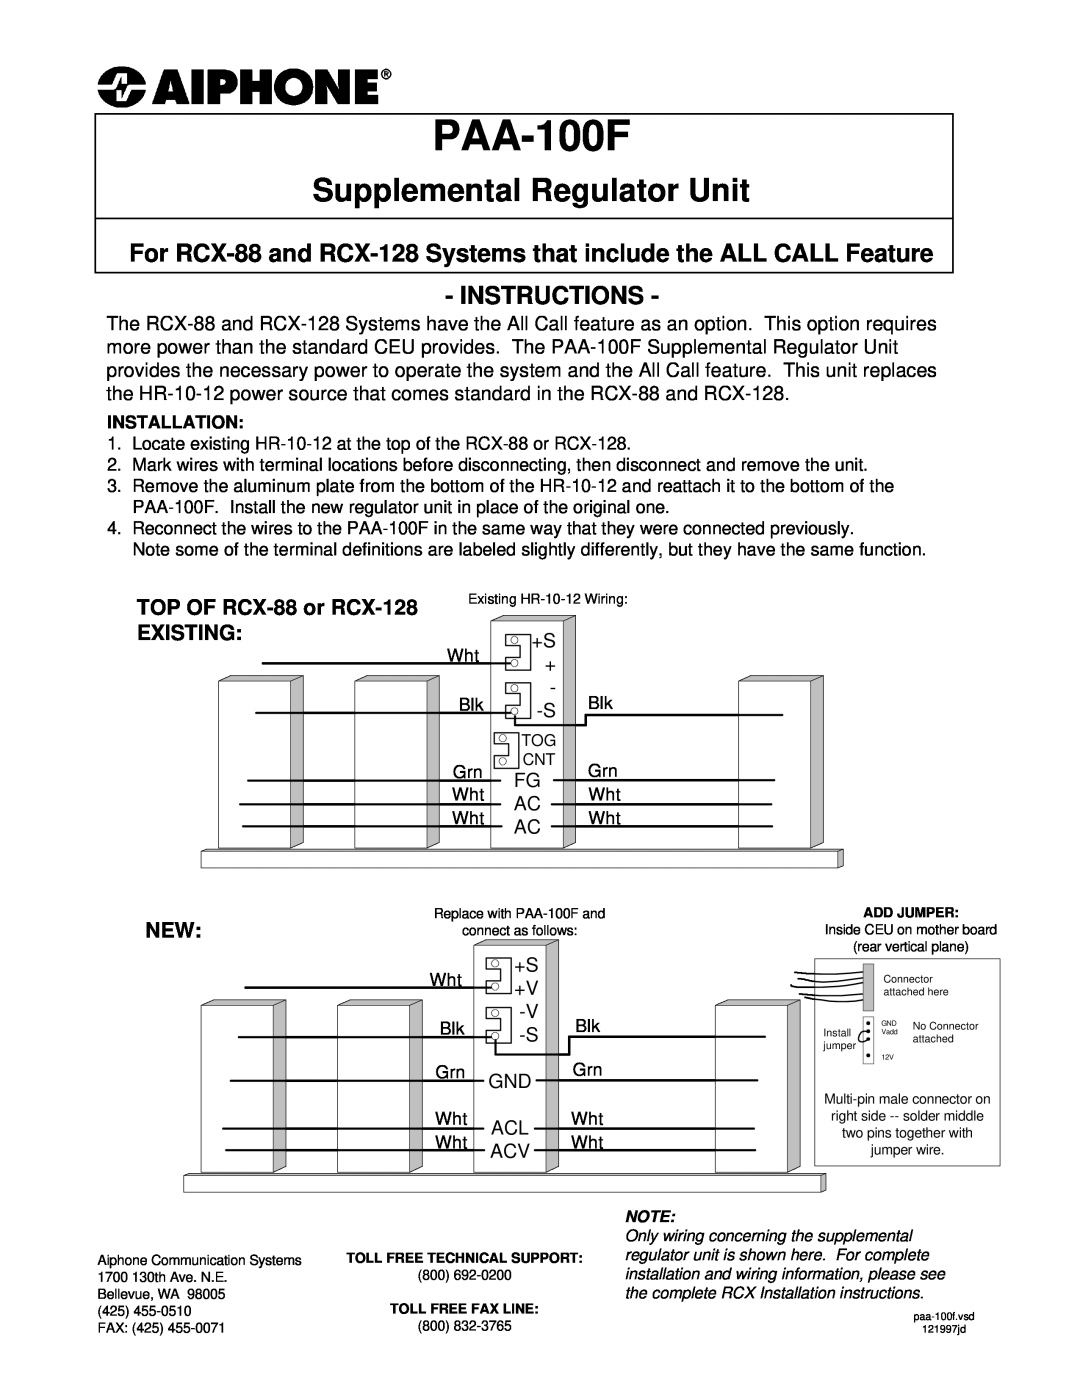 Aiphone PAA-100F installation instructions Supplemental Regulator Unit, Instructions, TOP OF RCX-88 or RCX-128, Existing 